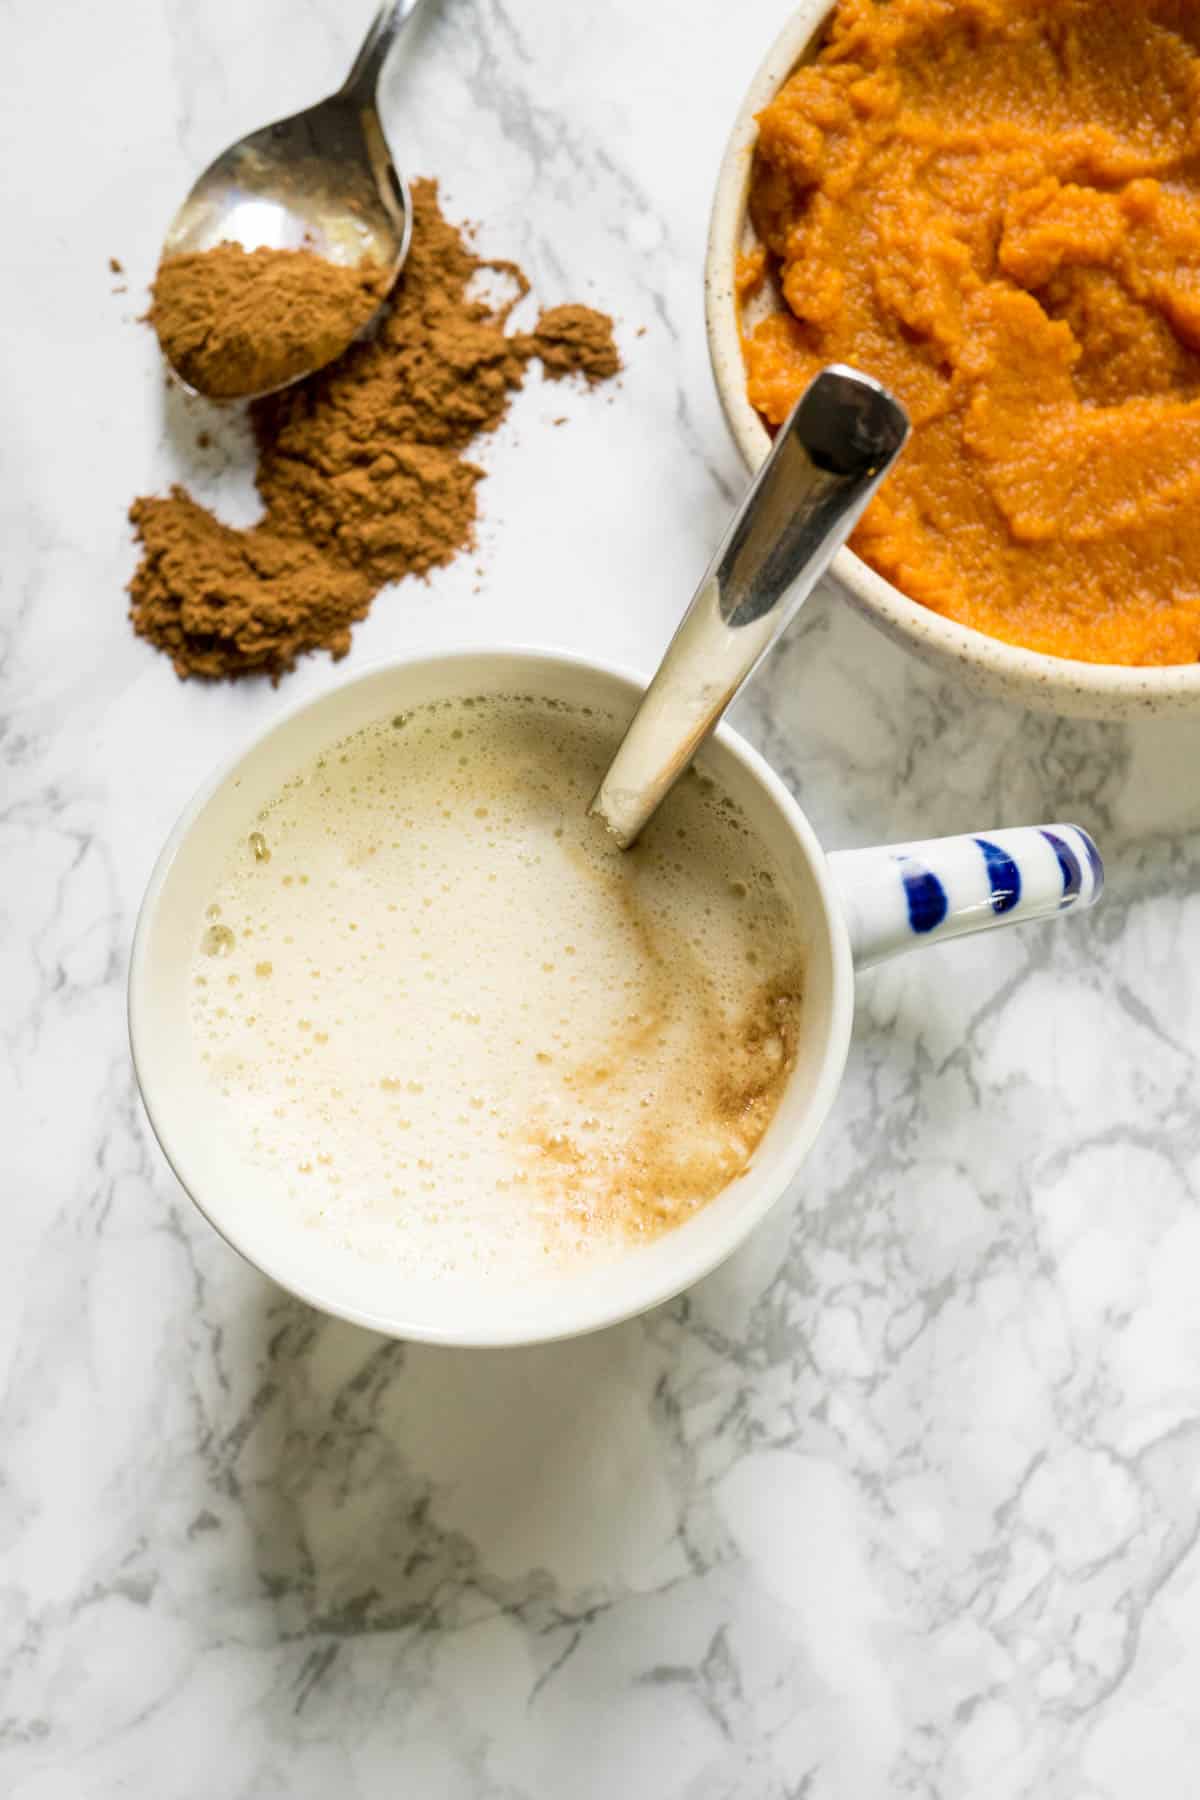 A mug of homemade pumpkin spice latte with a spoonful of spices and a bowl of pumpkin puree.